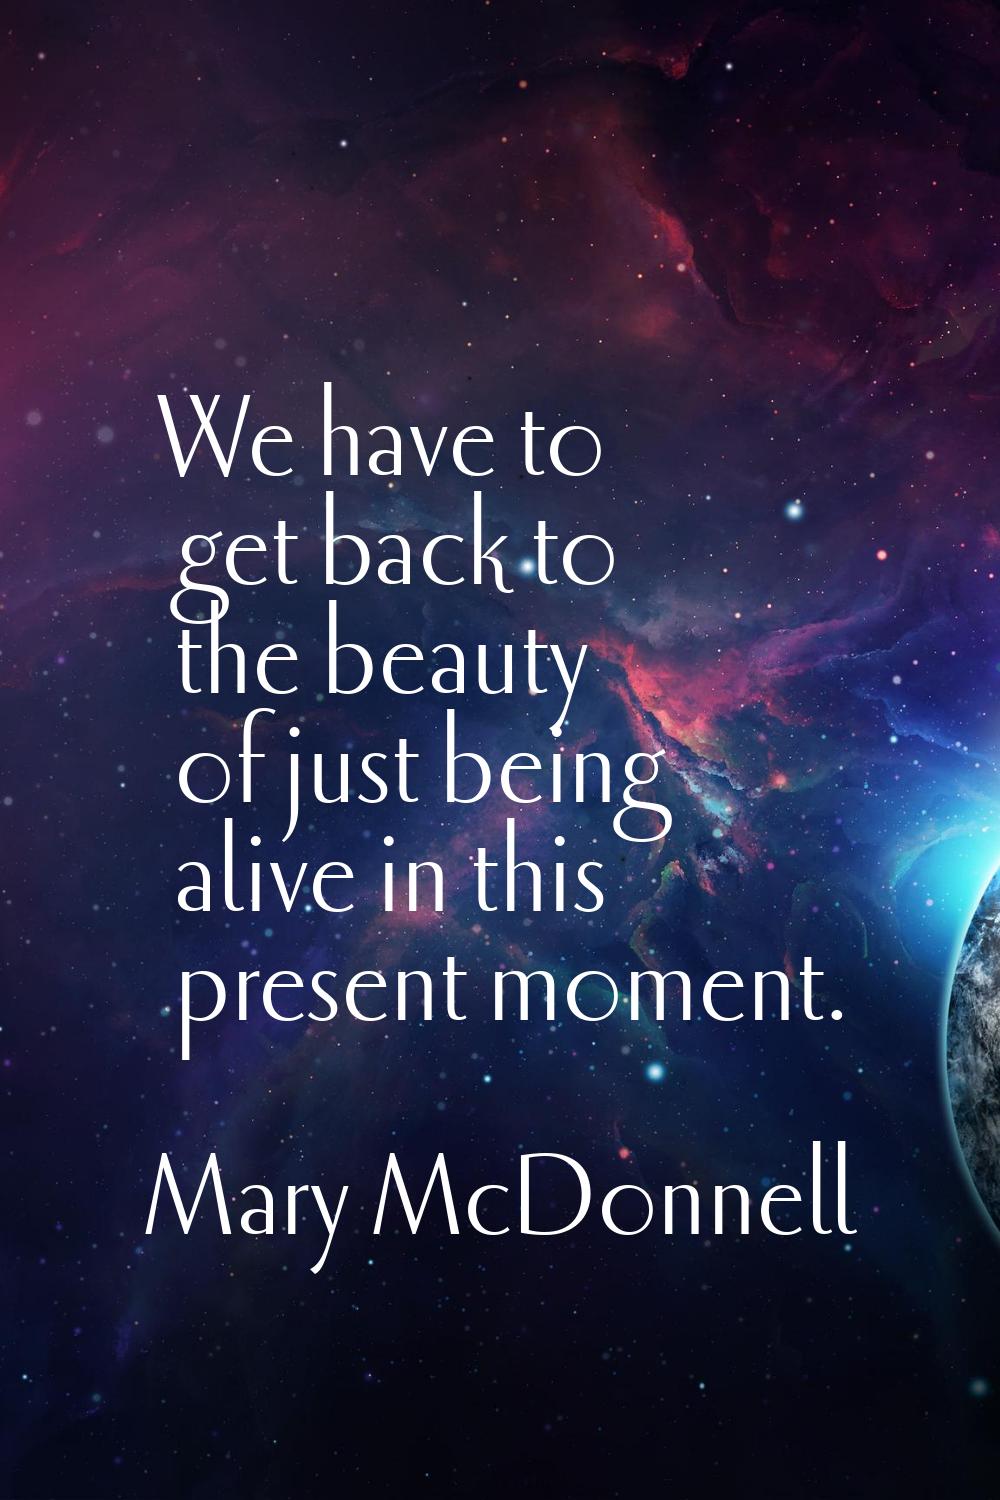 We have to get back to the beauty of just being alive in this present moment.